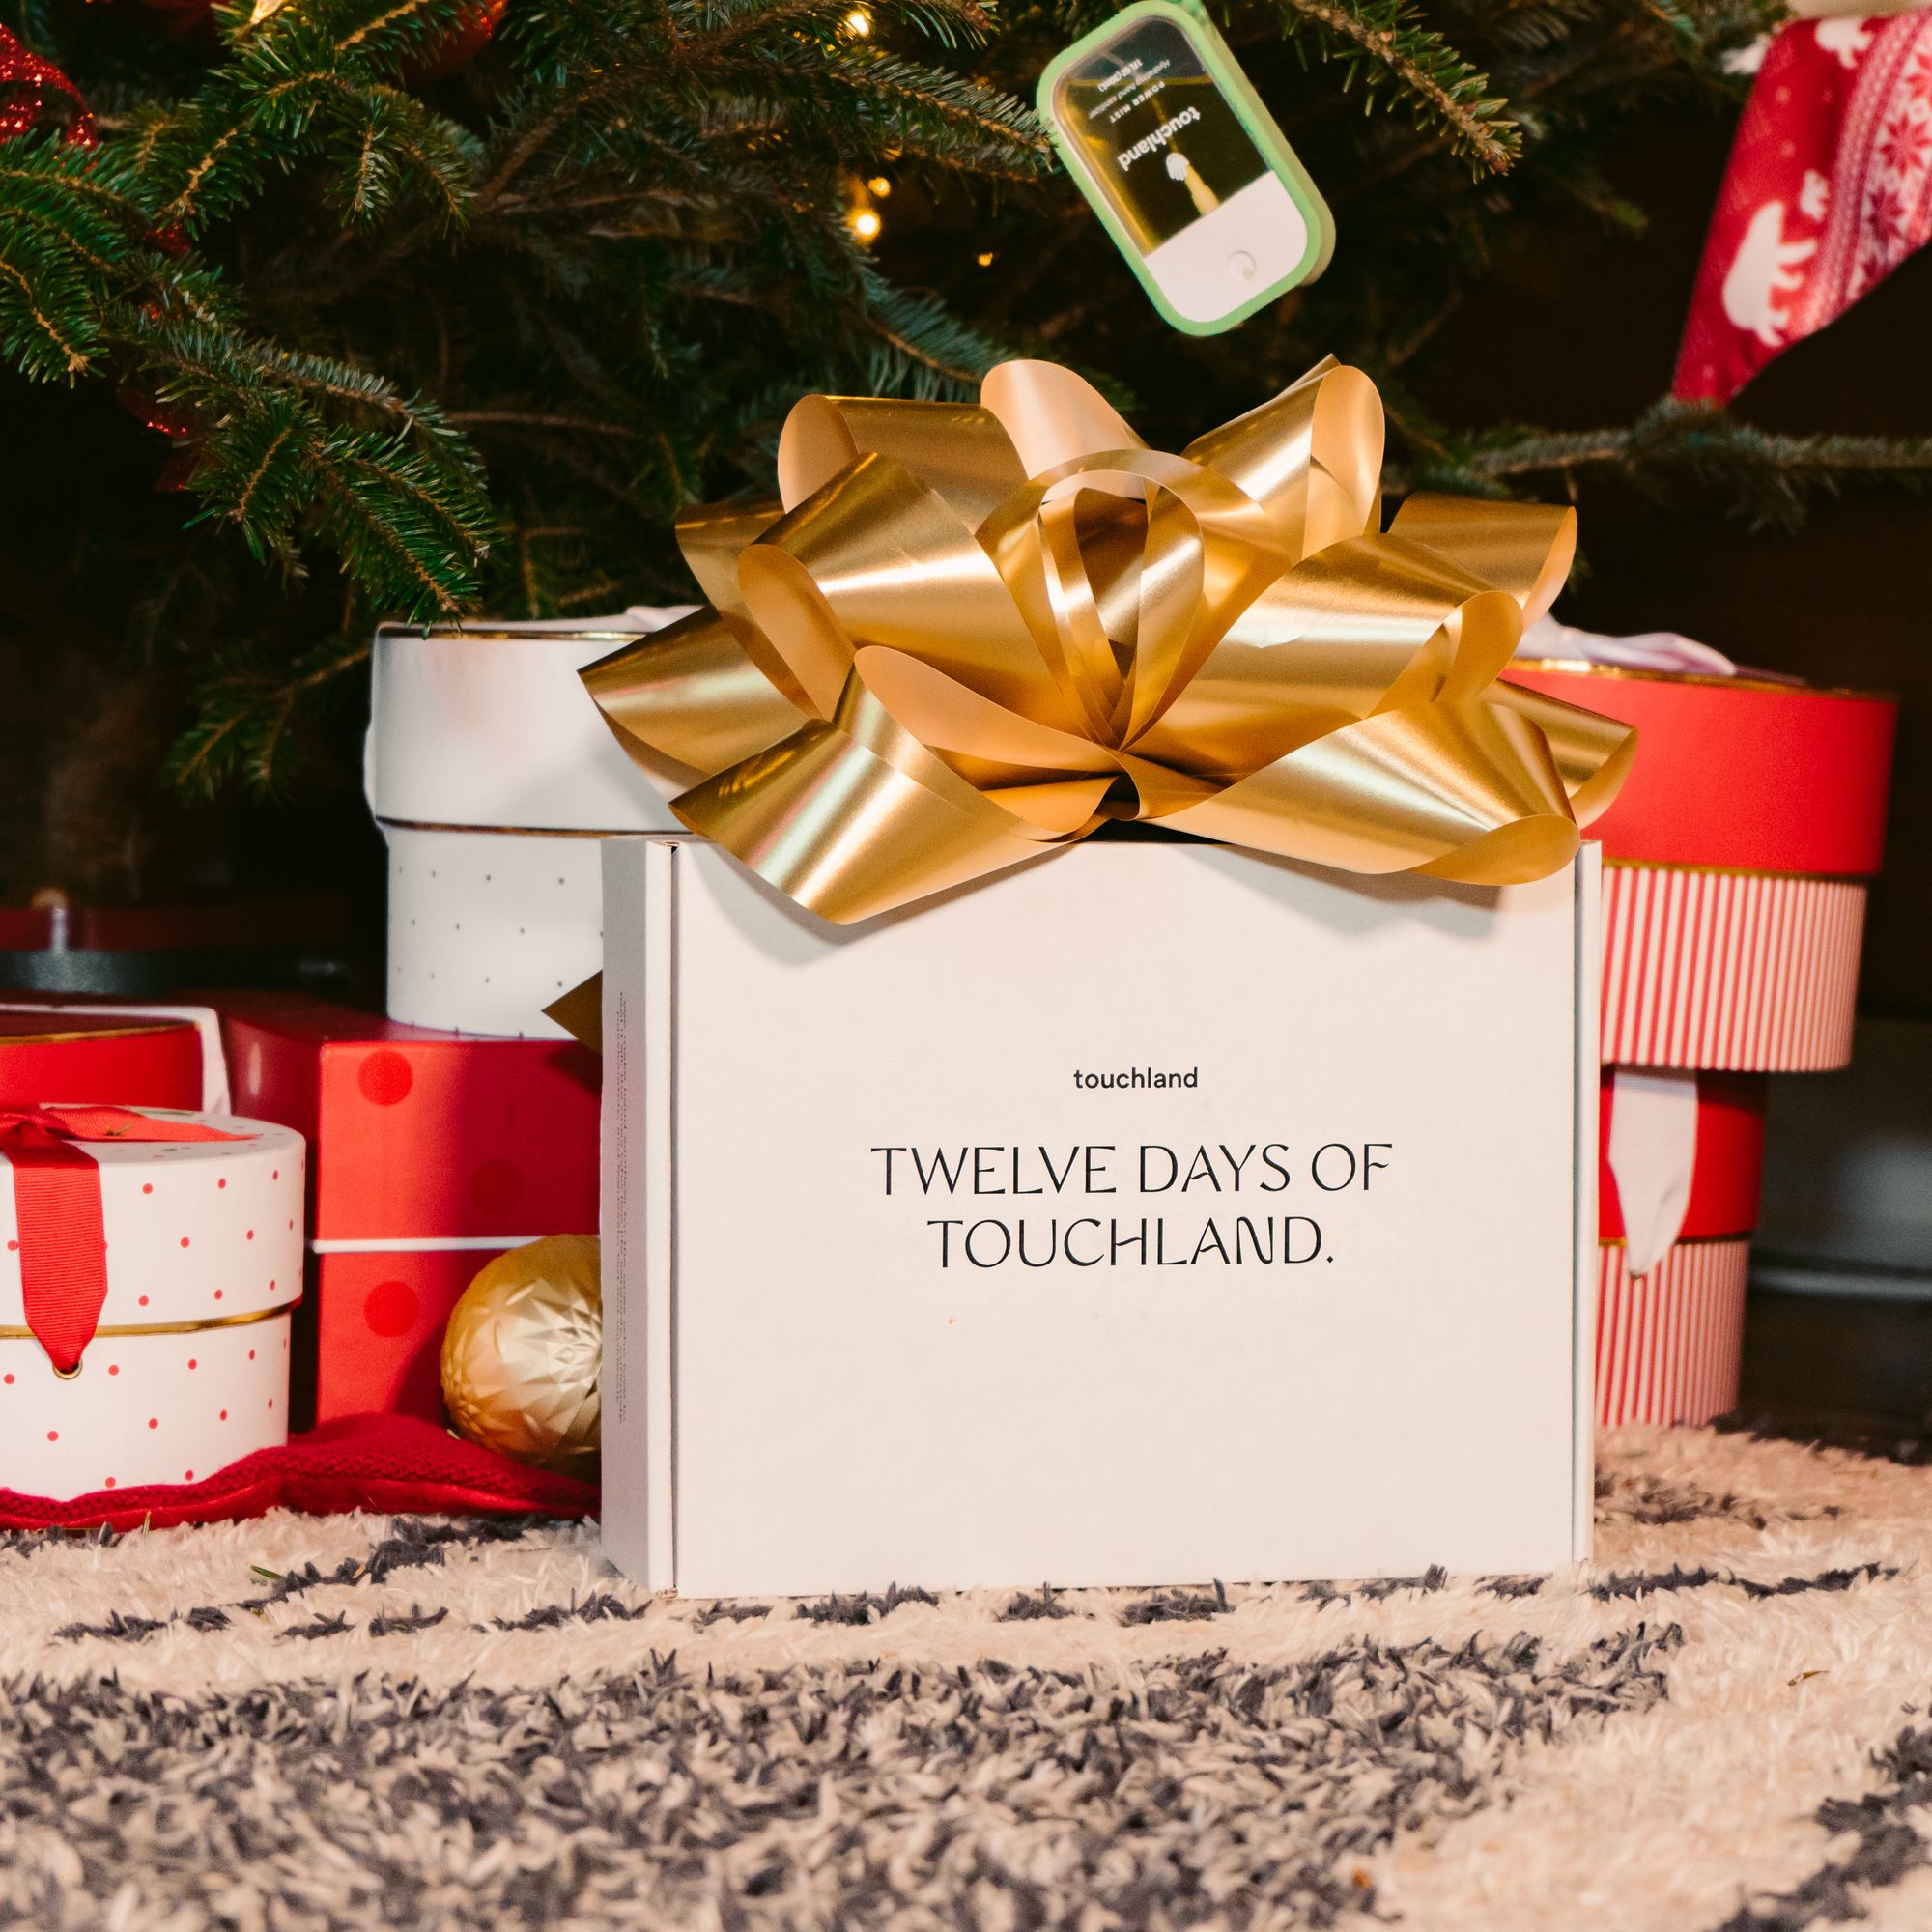 Touchland and noissue Partner on Unique Branded Holiday Gifts for Twelve Days of Touchland Giveaway